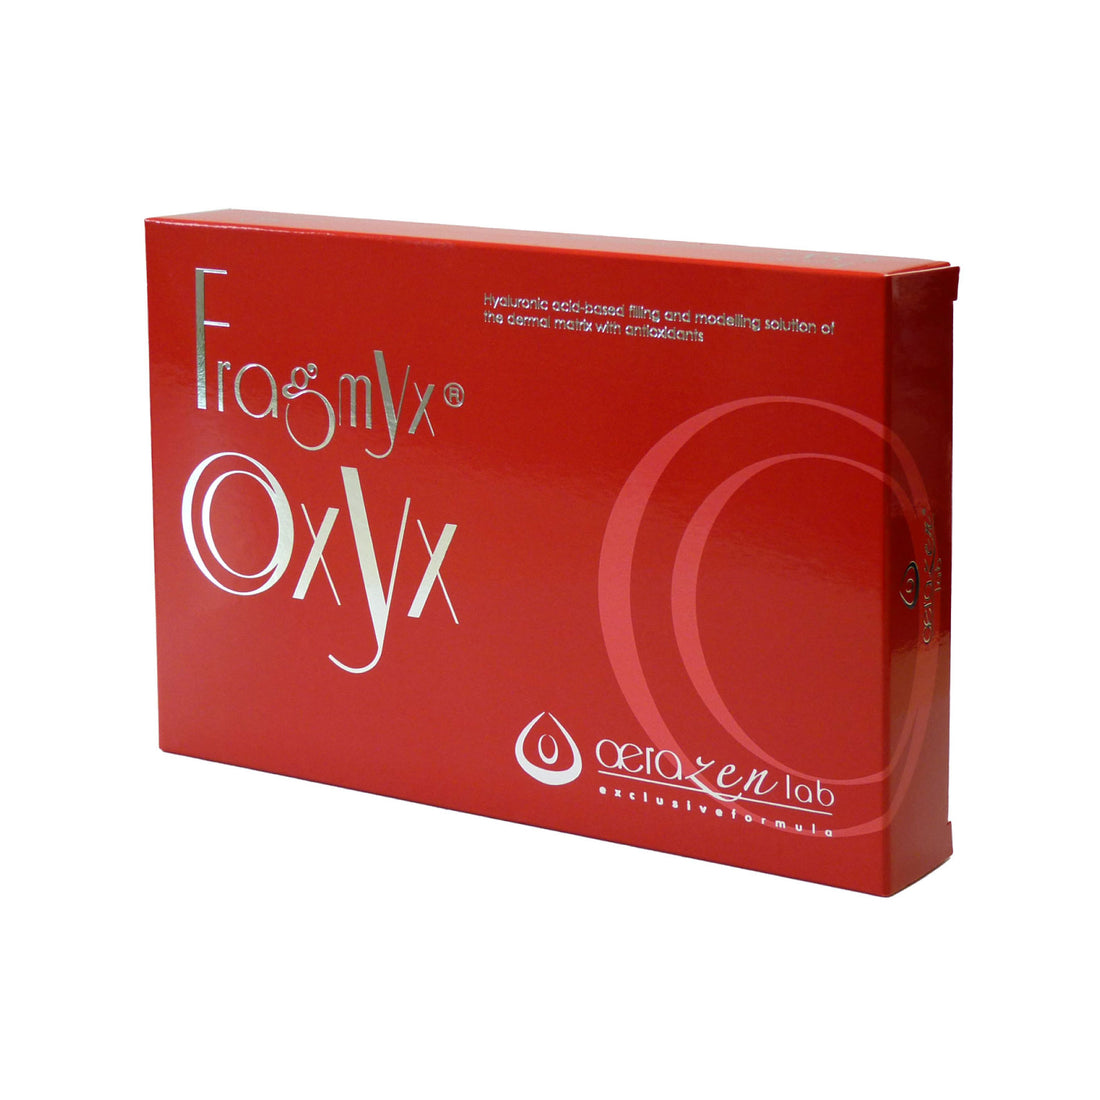 FRAGMYX OXYX - Solution based on Hyaluronic Acid from the dermal matrix with Antioxidants